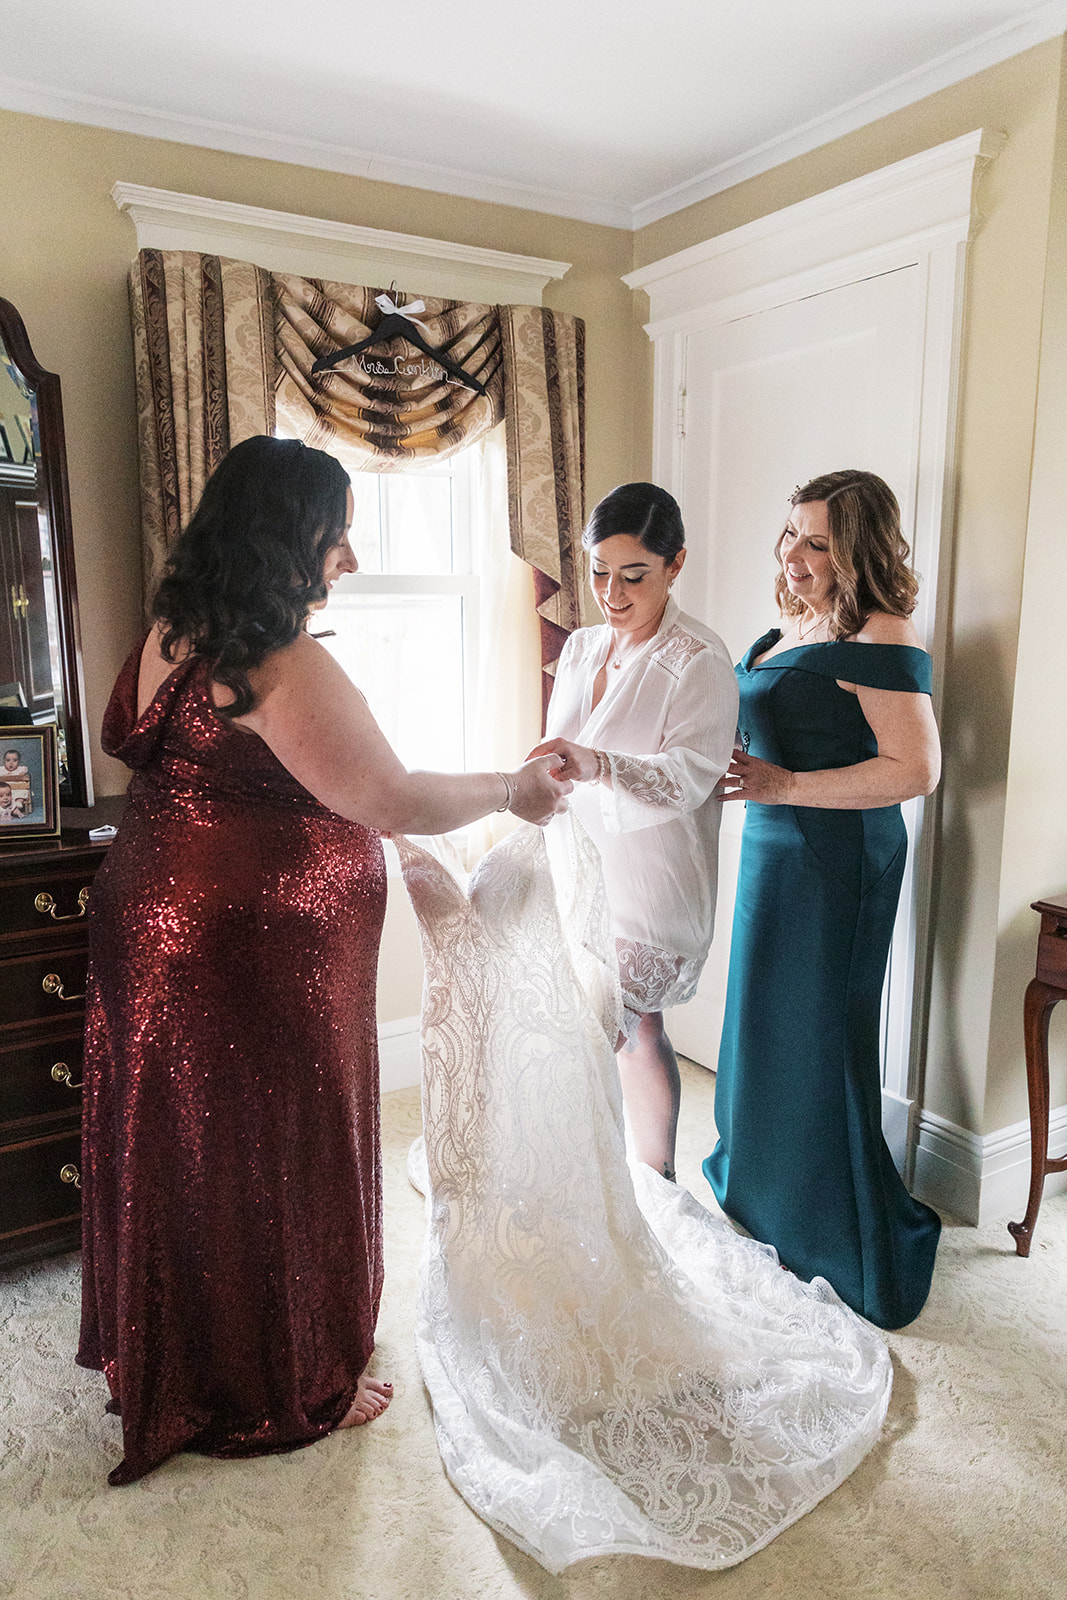 A bride steps into her dress with help from mom